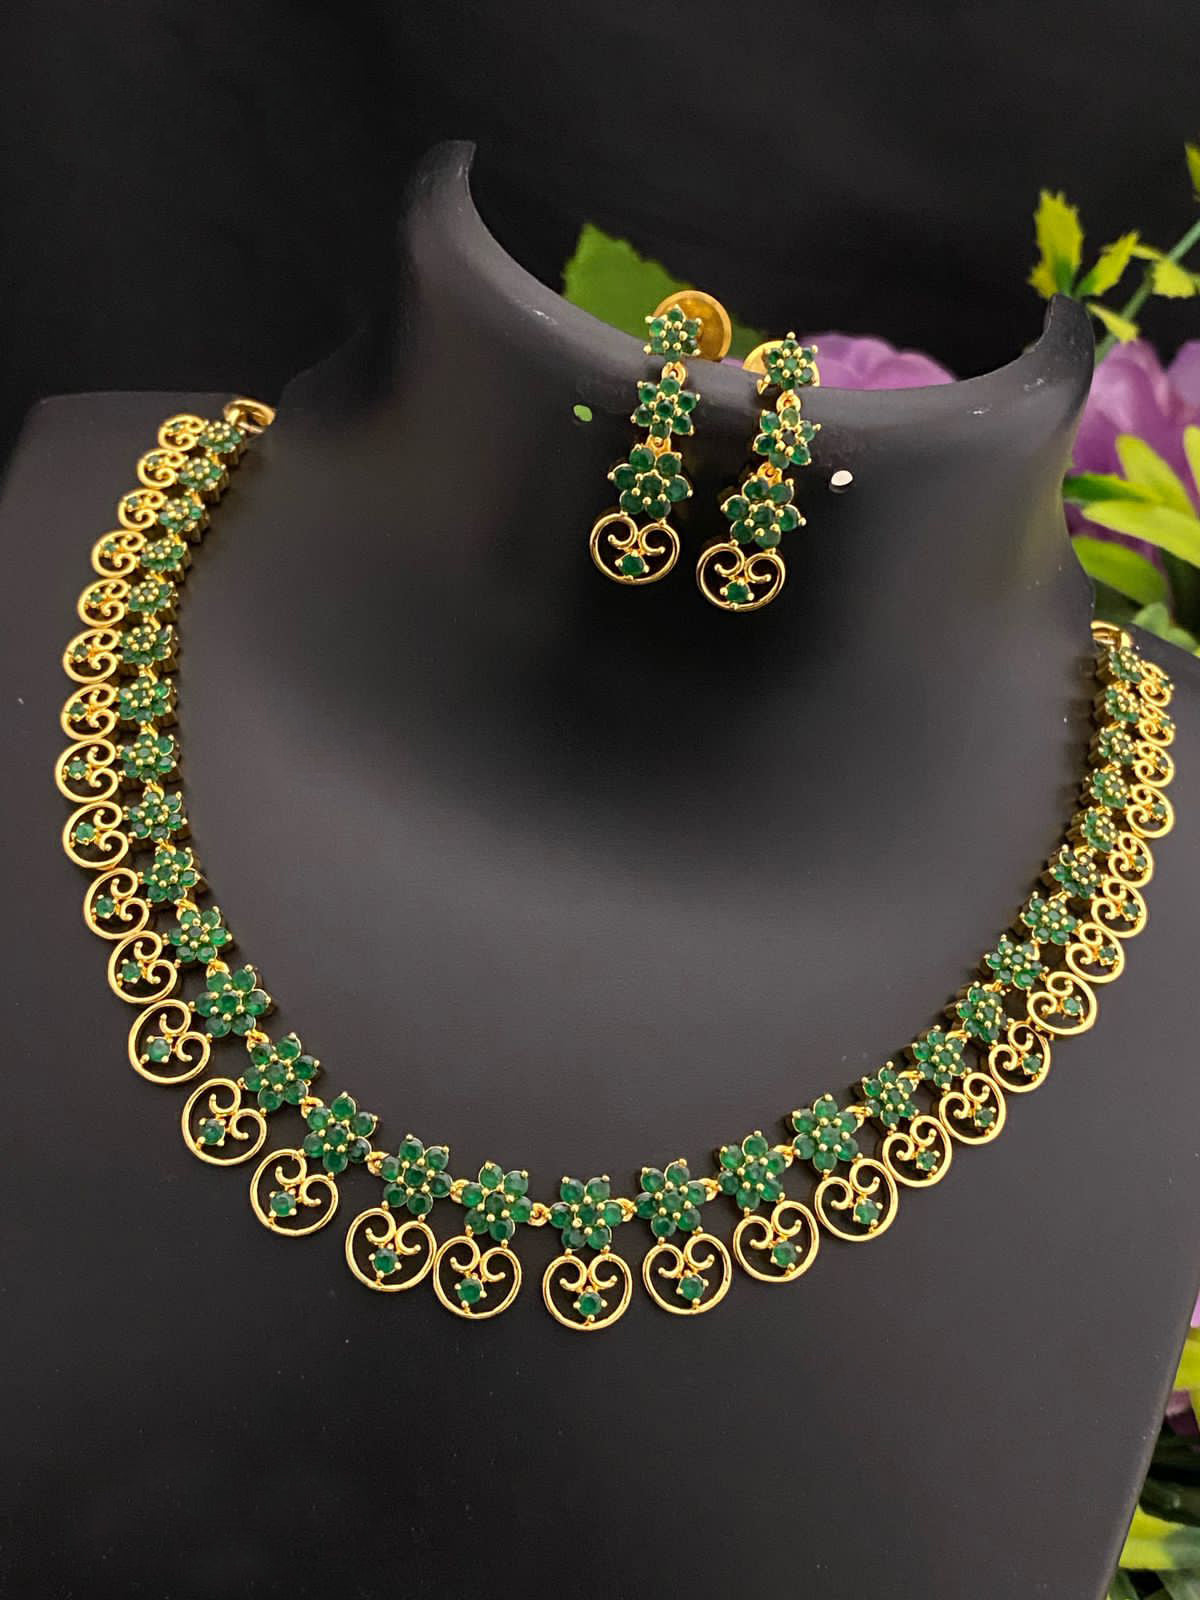 22K Gold Finish American Diamond Crystal Floral Design Necklace Earrings|Ruby Emerald stone Necklace set